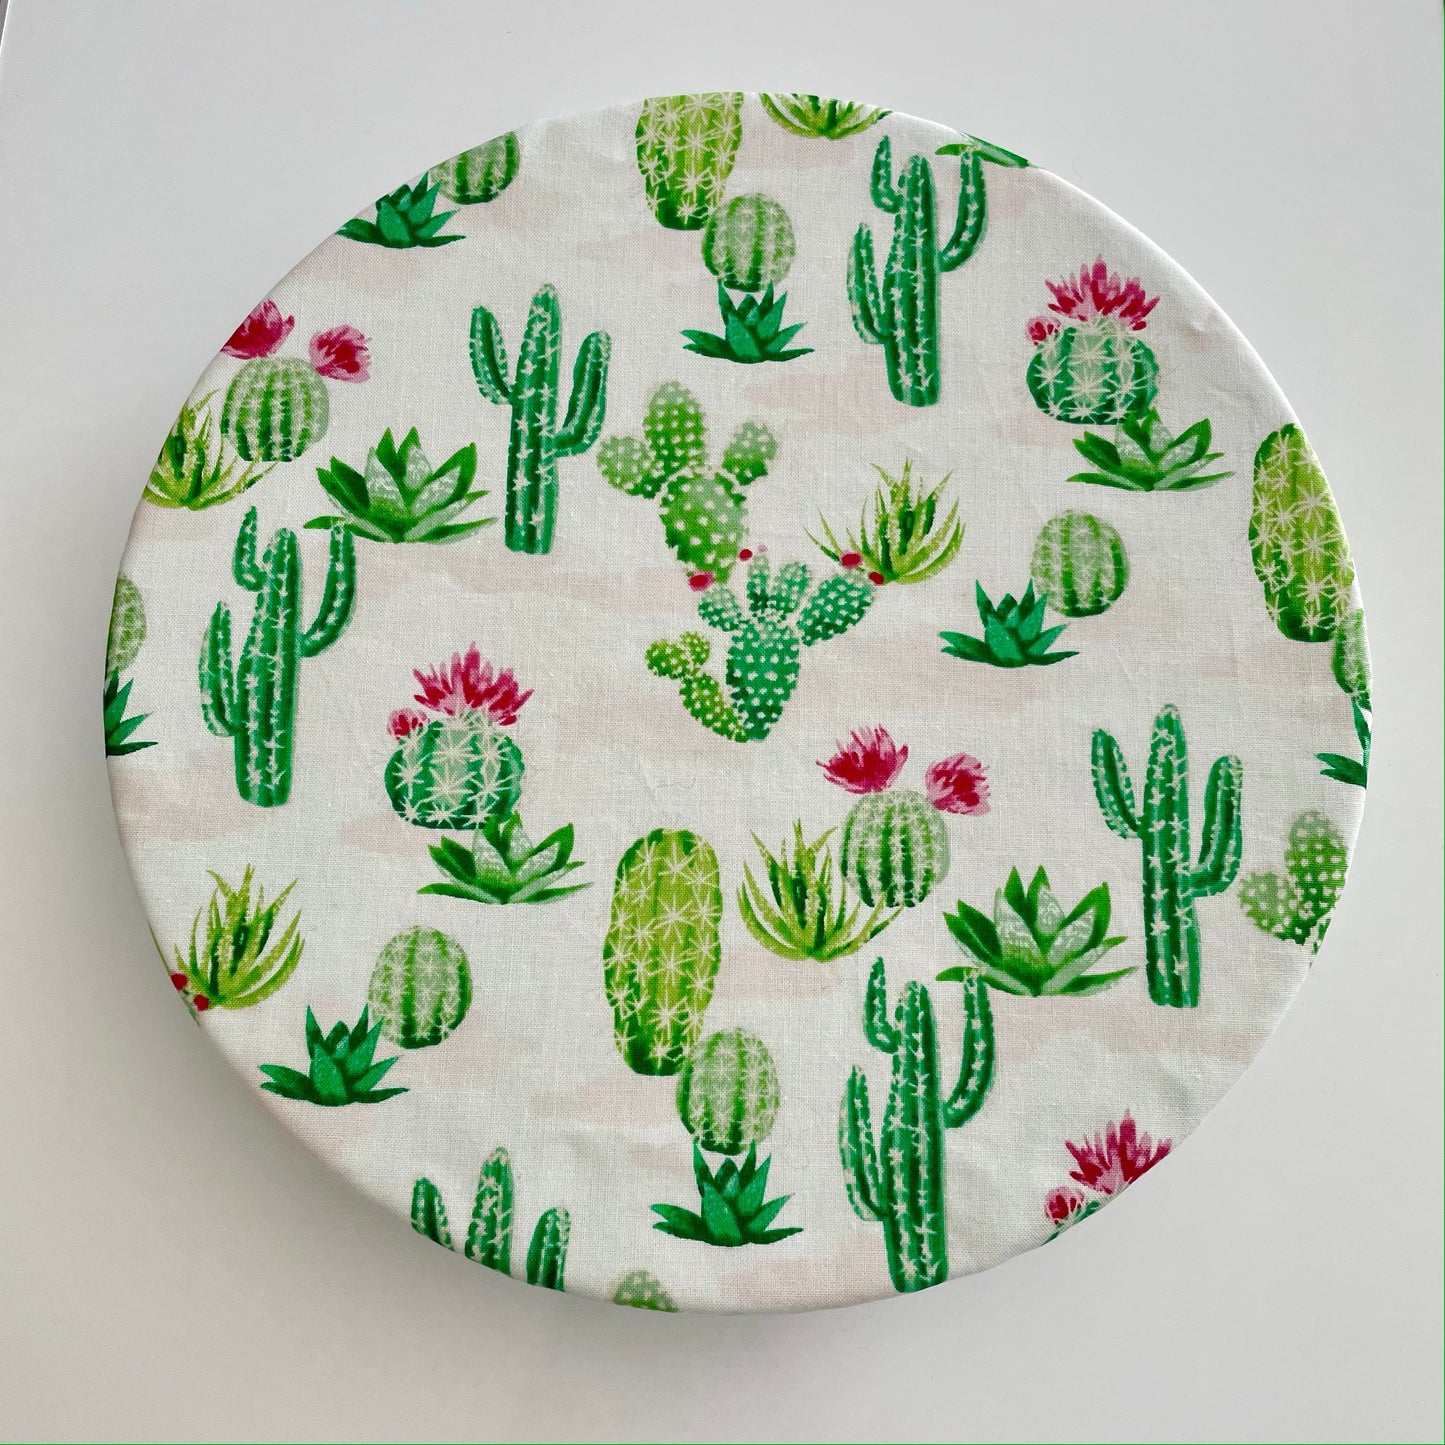 Stand Mixer Bowl Covers - Cactus Lovers